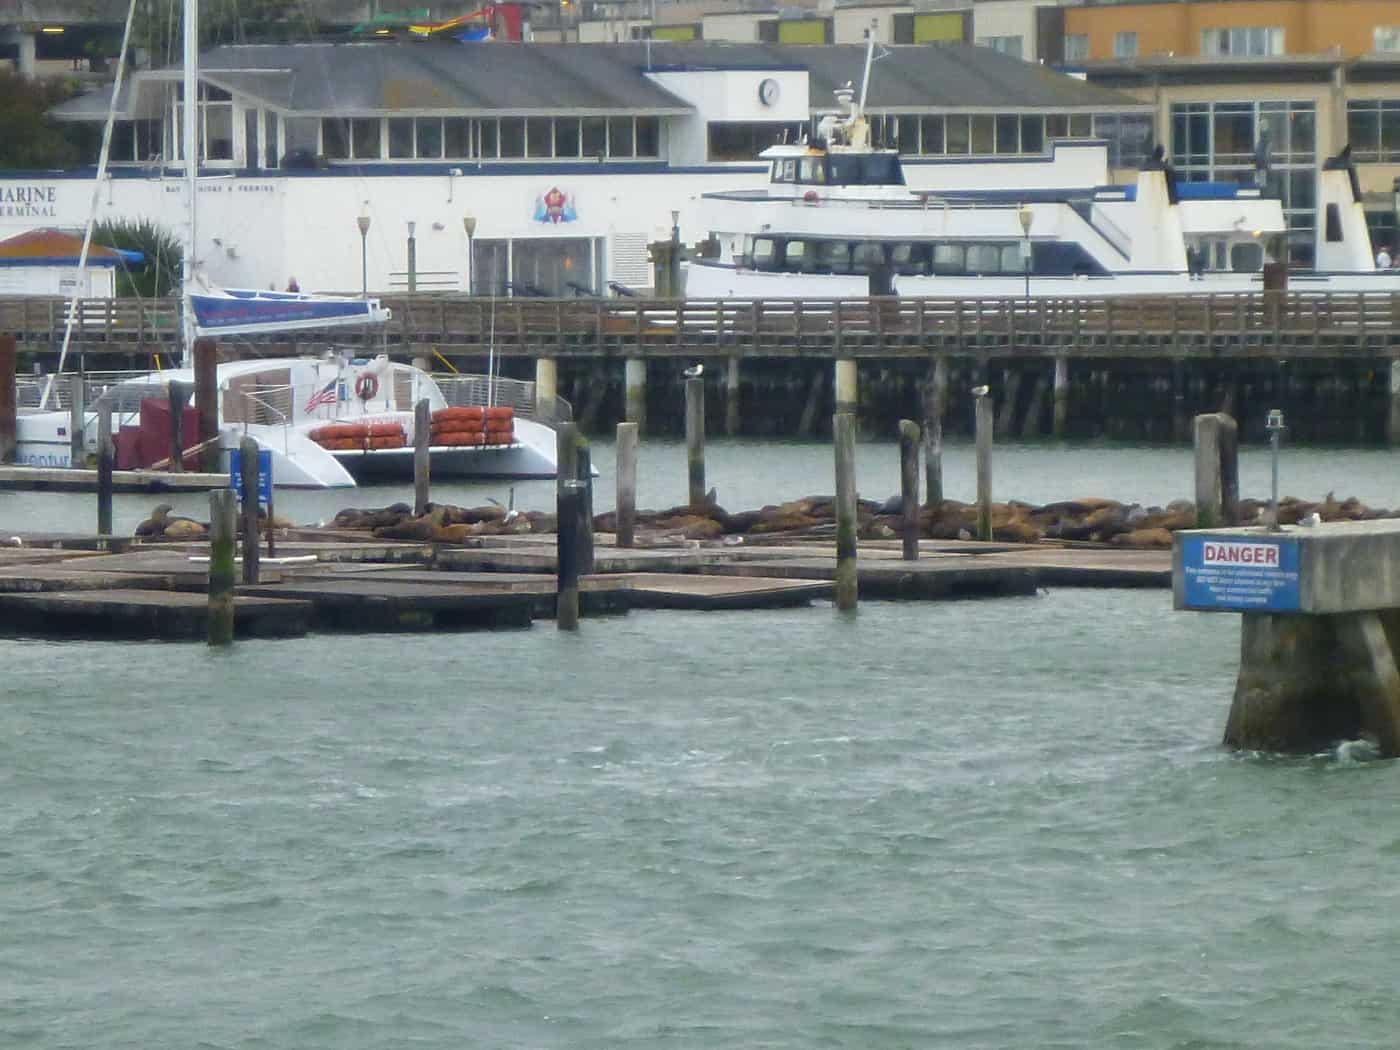 Sea lions lounging on Pier 39 as we cruise by